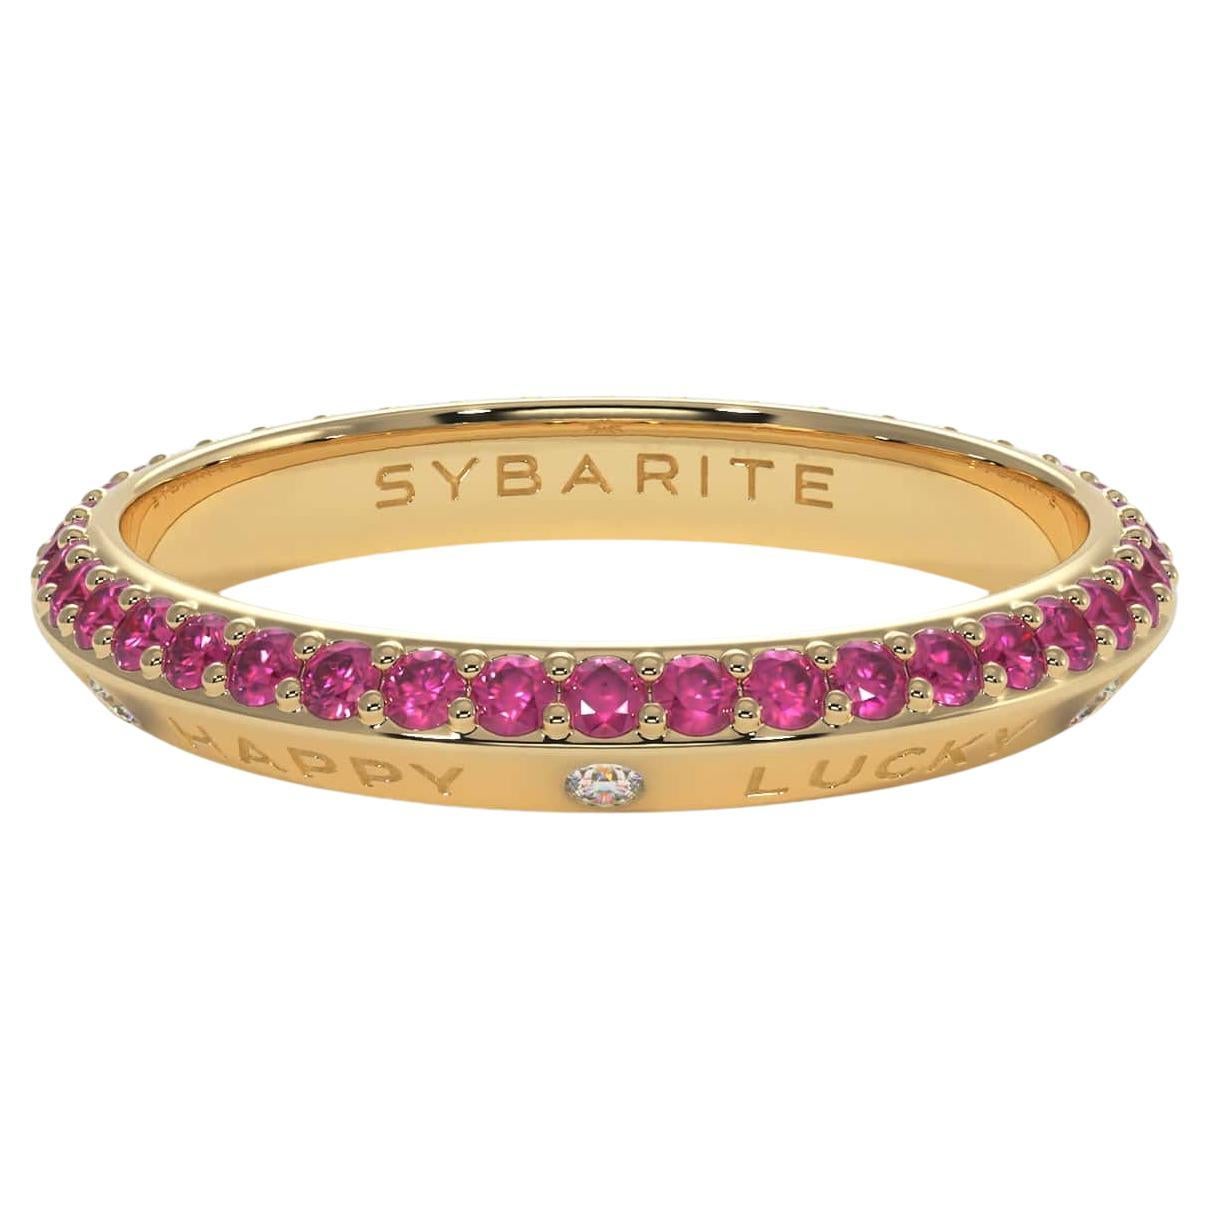 Fortune Rainbow Pink Band Ring